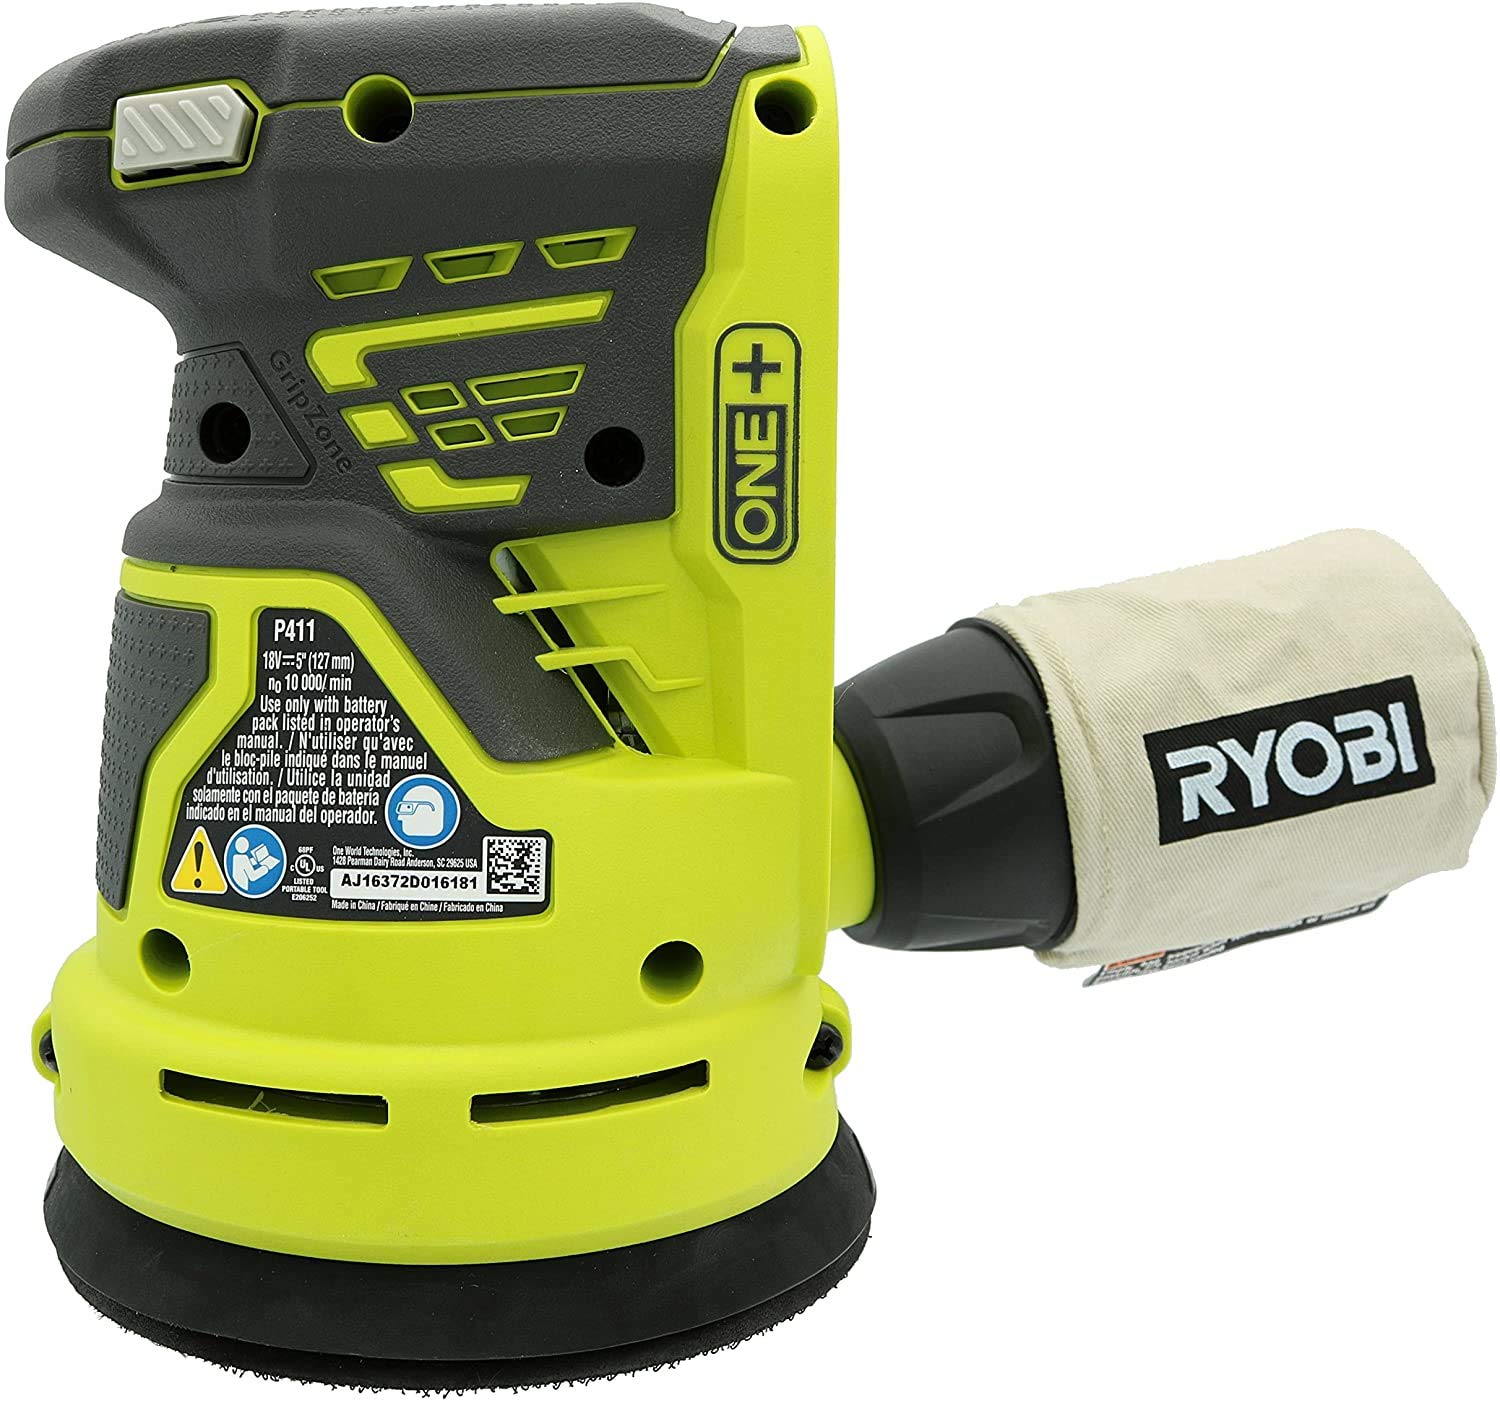 RYOBI 18-Volt Cordless 5 in. Random Orbit Sander Kit with Battery and Charger (NO Retail Packaging, Bulk Packaged)